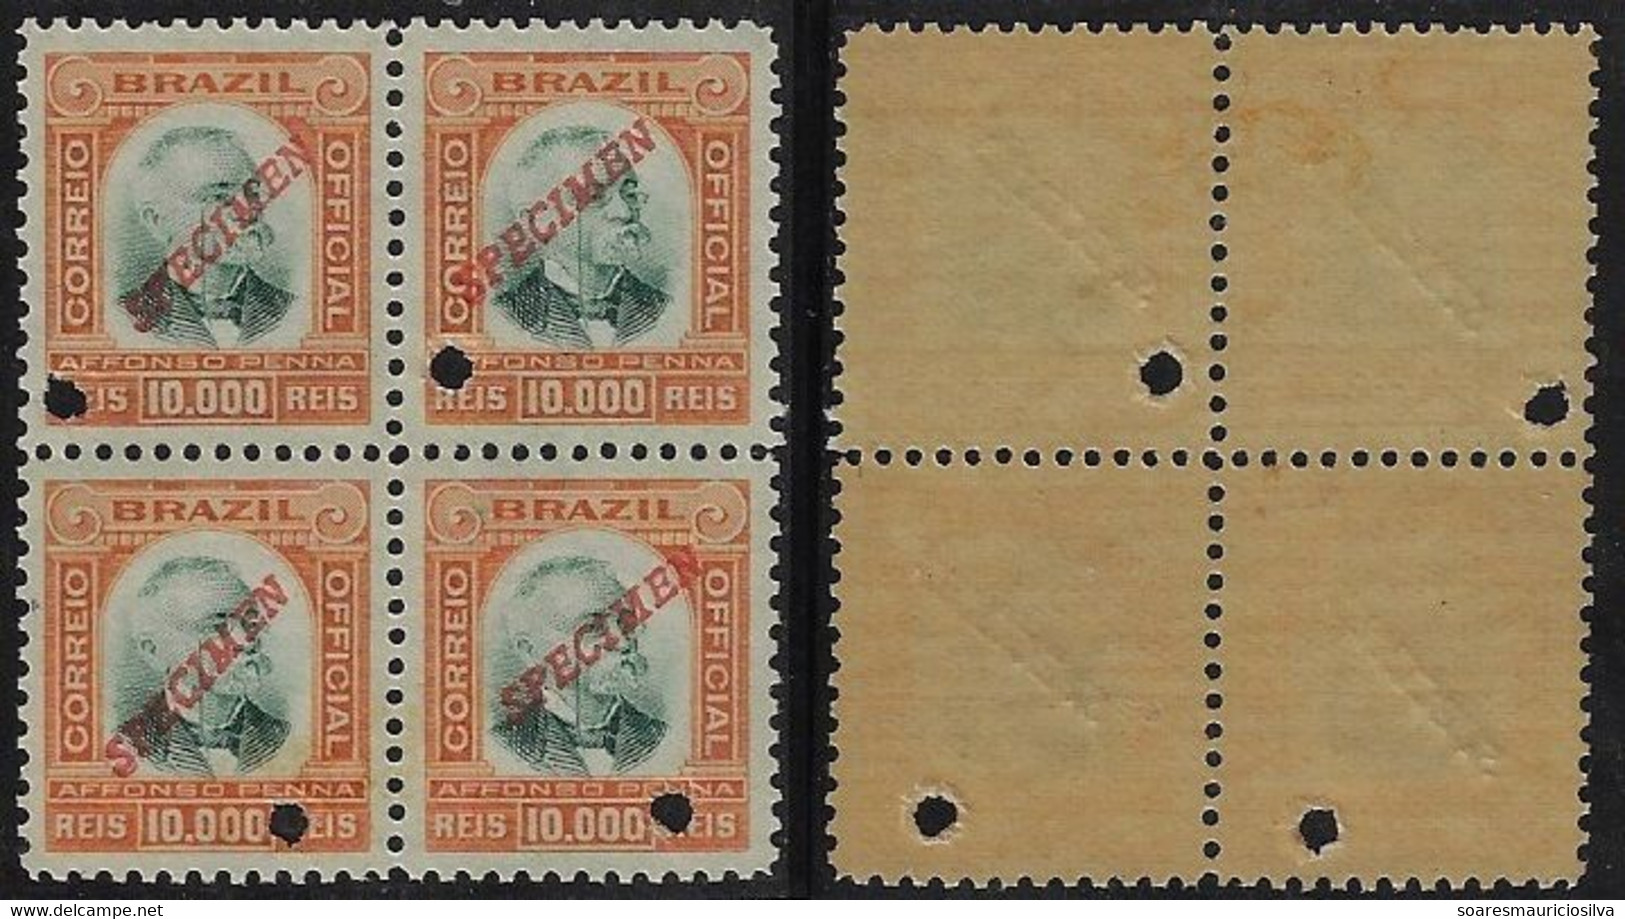 Brazil 1906 RHM-Official-13 President Afonso Pena 10,000 Réis Block Of 4 Stamp With Hole And Overprint Specimen Unused - Service